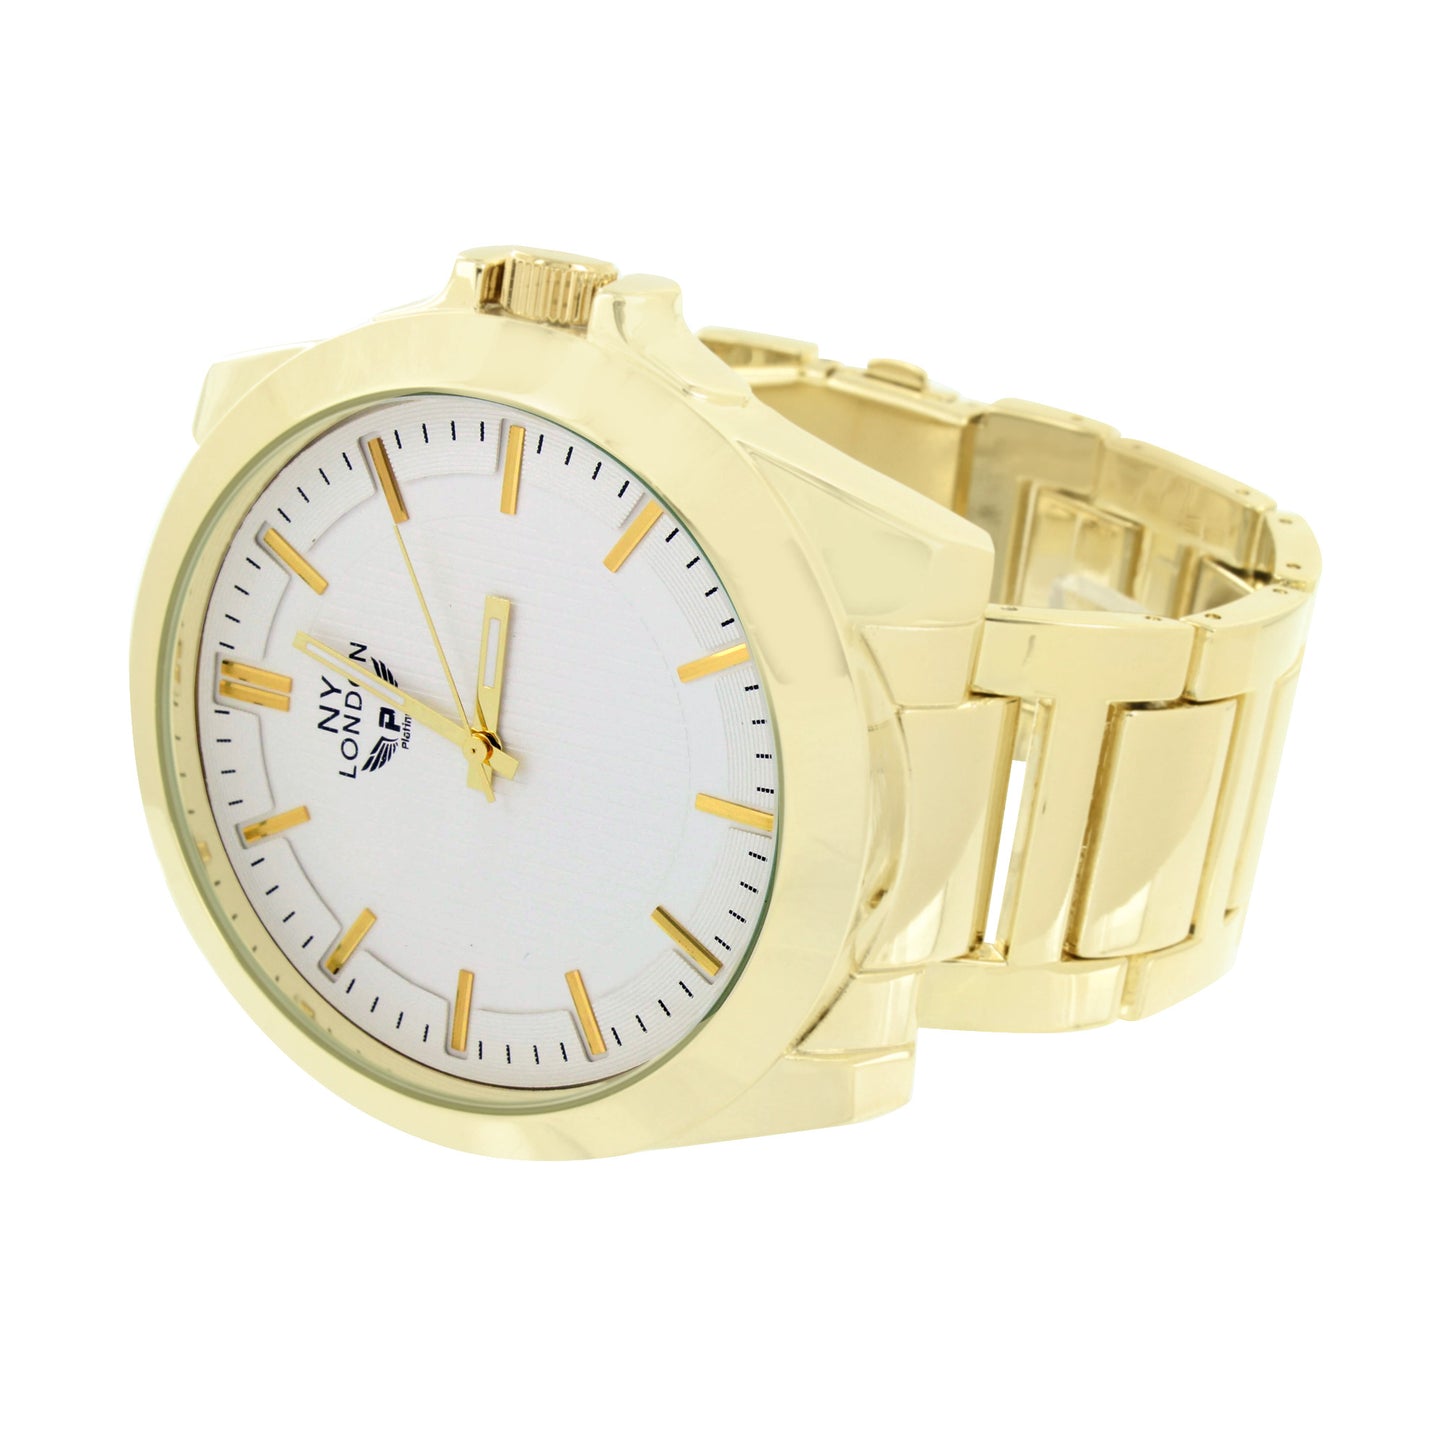 New Gold Tone Mens Watch White Dial Round Face Analog NY London